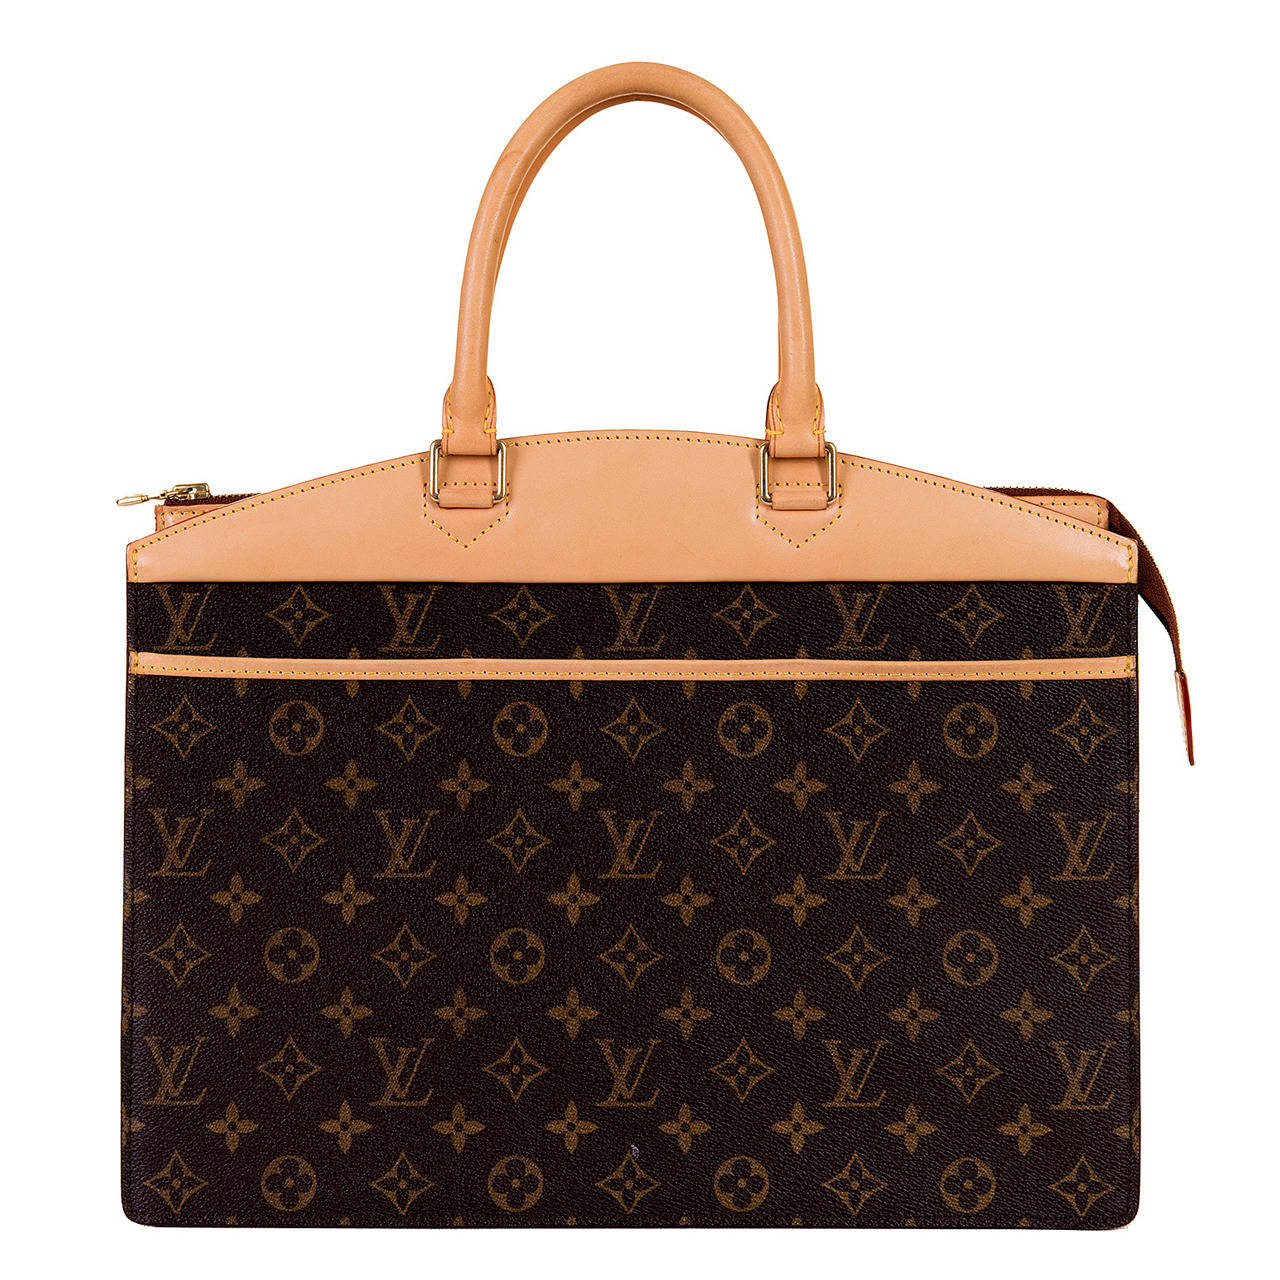 A Special Order Louis Vuitton 35cm 'Sac Riviera' at 1stdibs